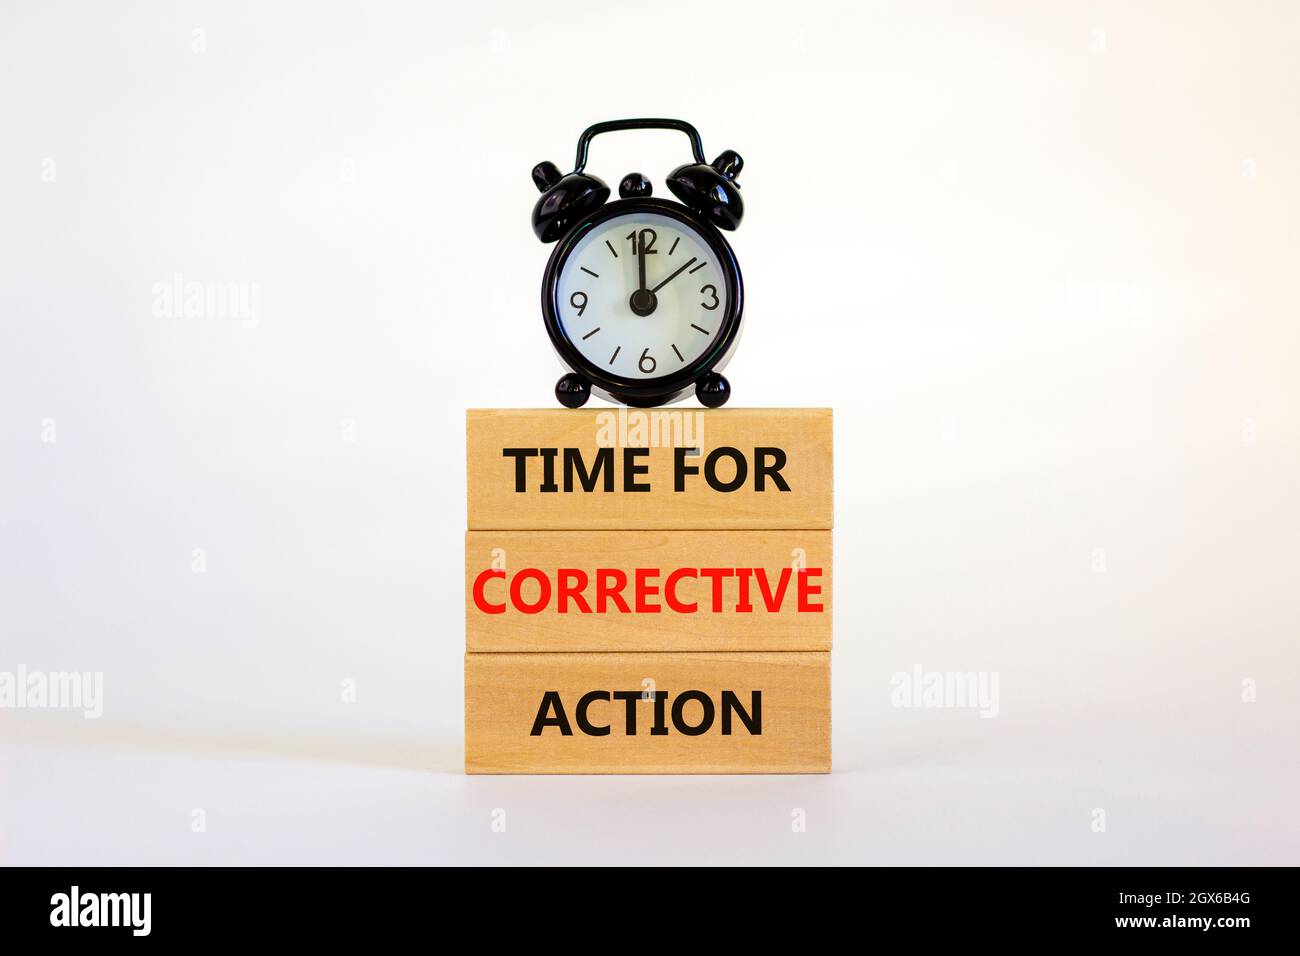 Time for corrective action symbol. Wooden blocks with words 'Time for corrective action' on a beautiful white background. Black alarm clock. Business, Stock Photo